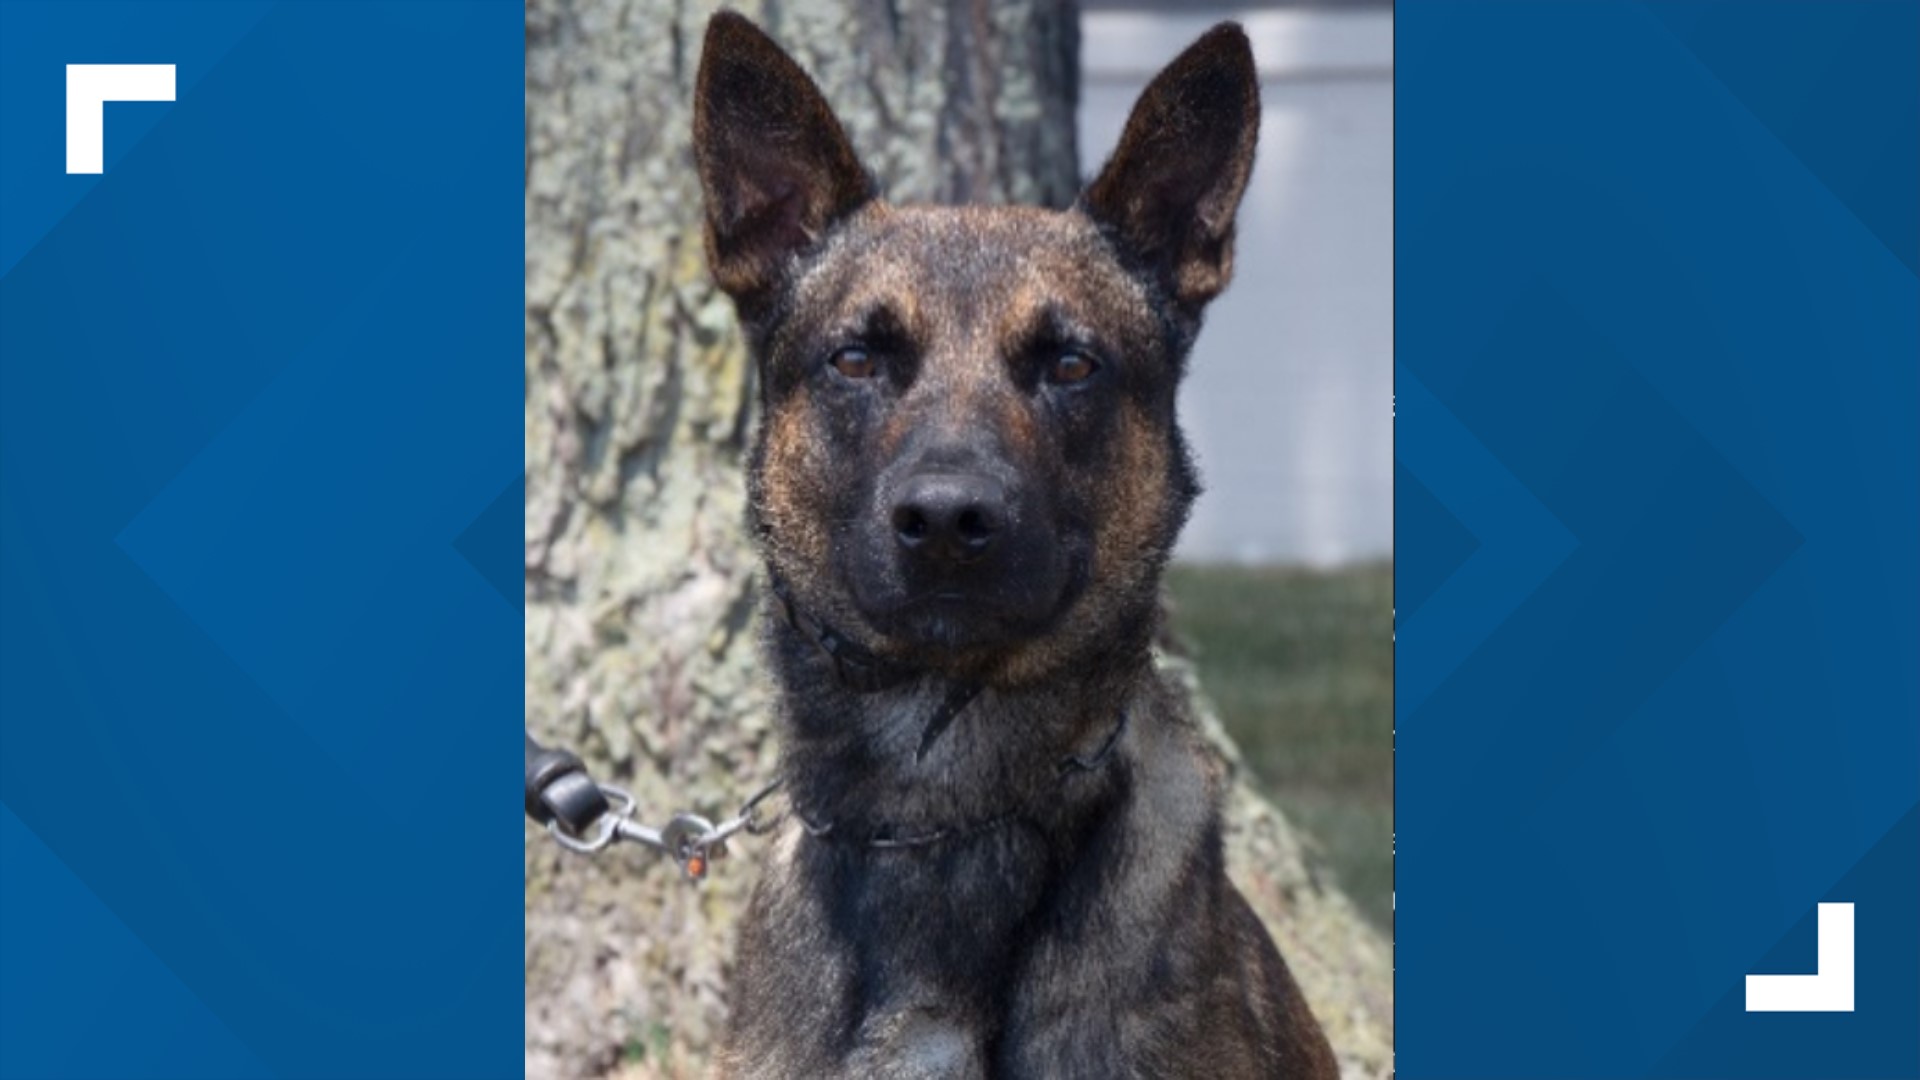 The 4-year-old Belgian Malinois subdued the fugitive as he attempted to crawl through the underbrush to escape his pursuers Wednesday morning in Chester County.